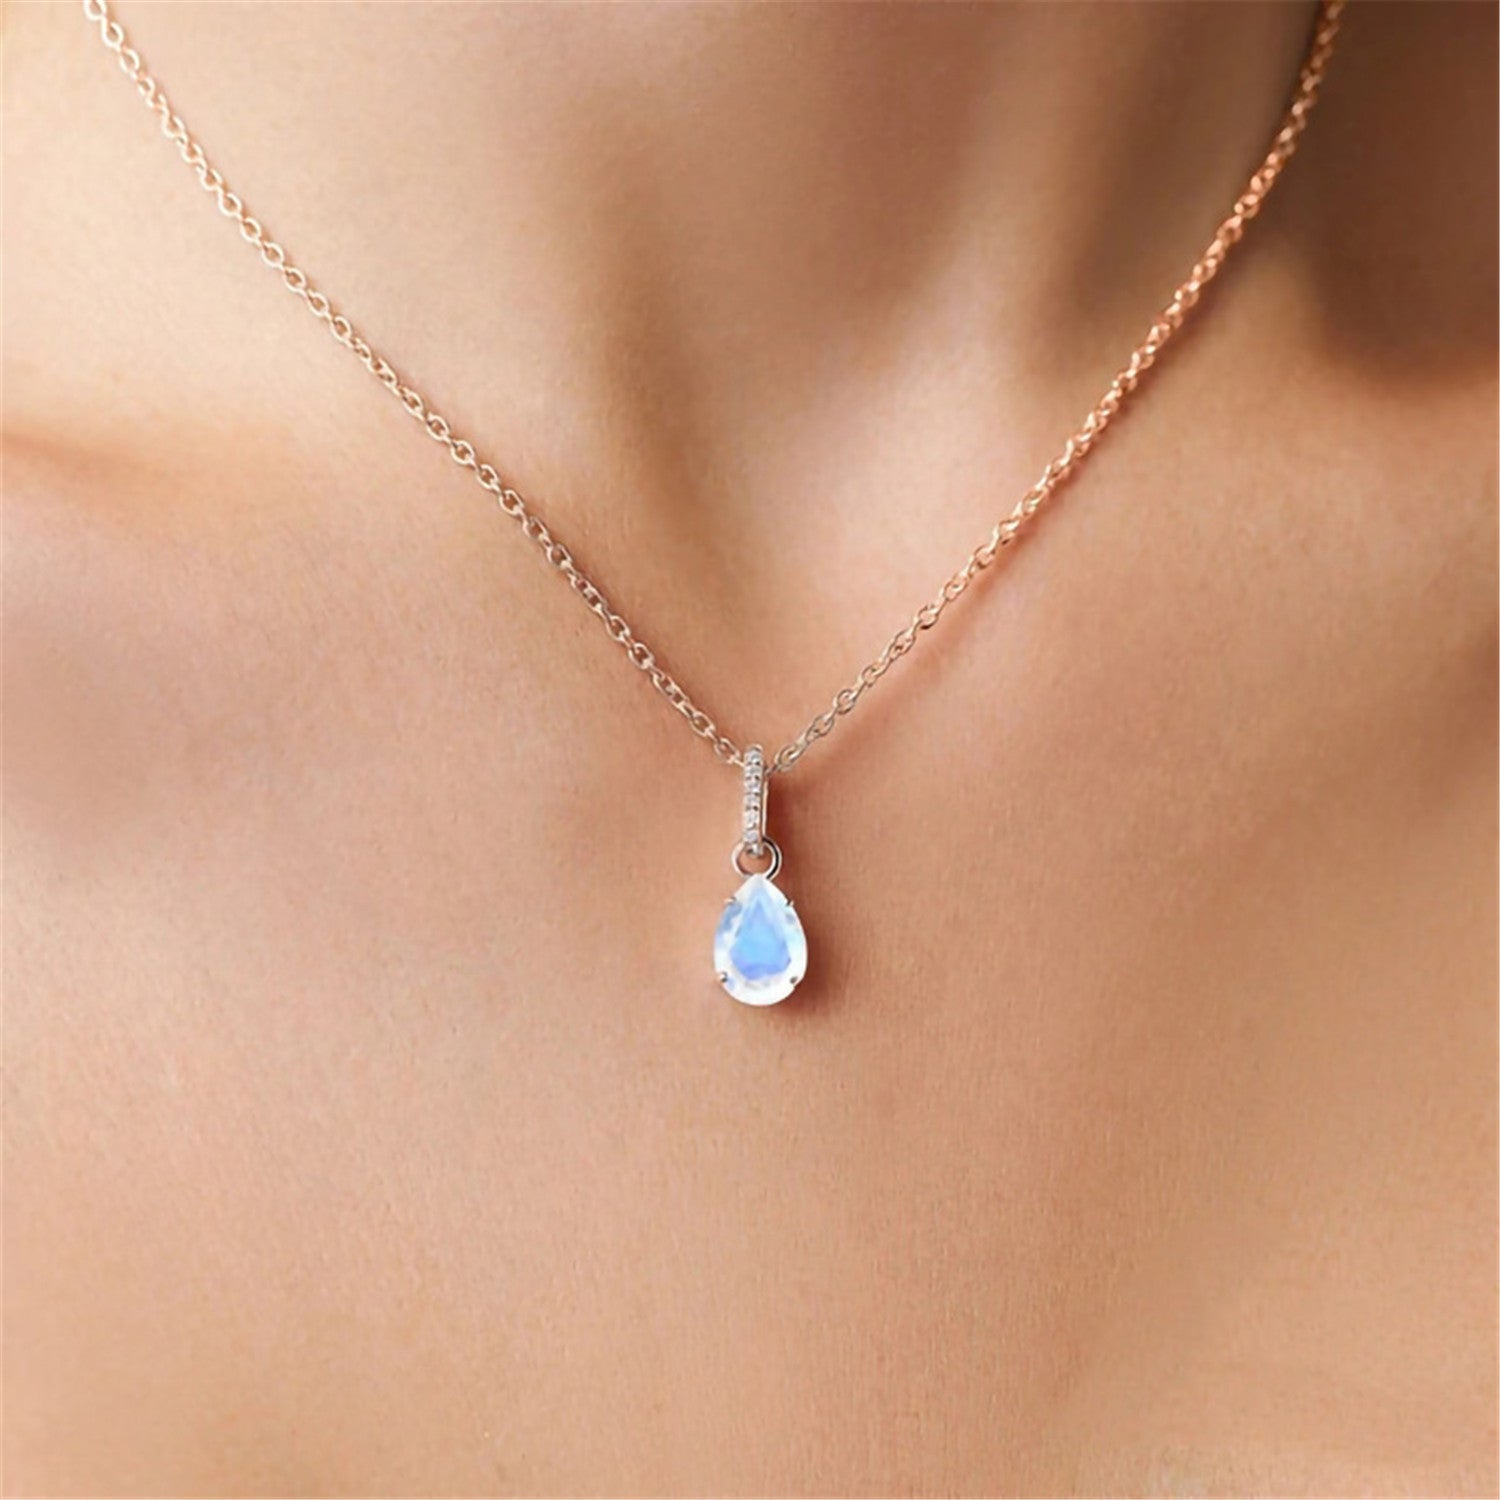 Moonstone Pendant,s925 Silver,With Water Drop Design